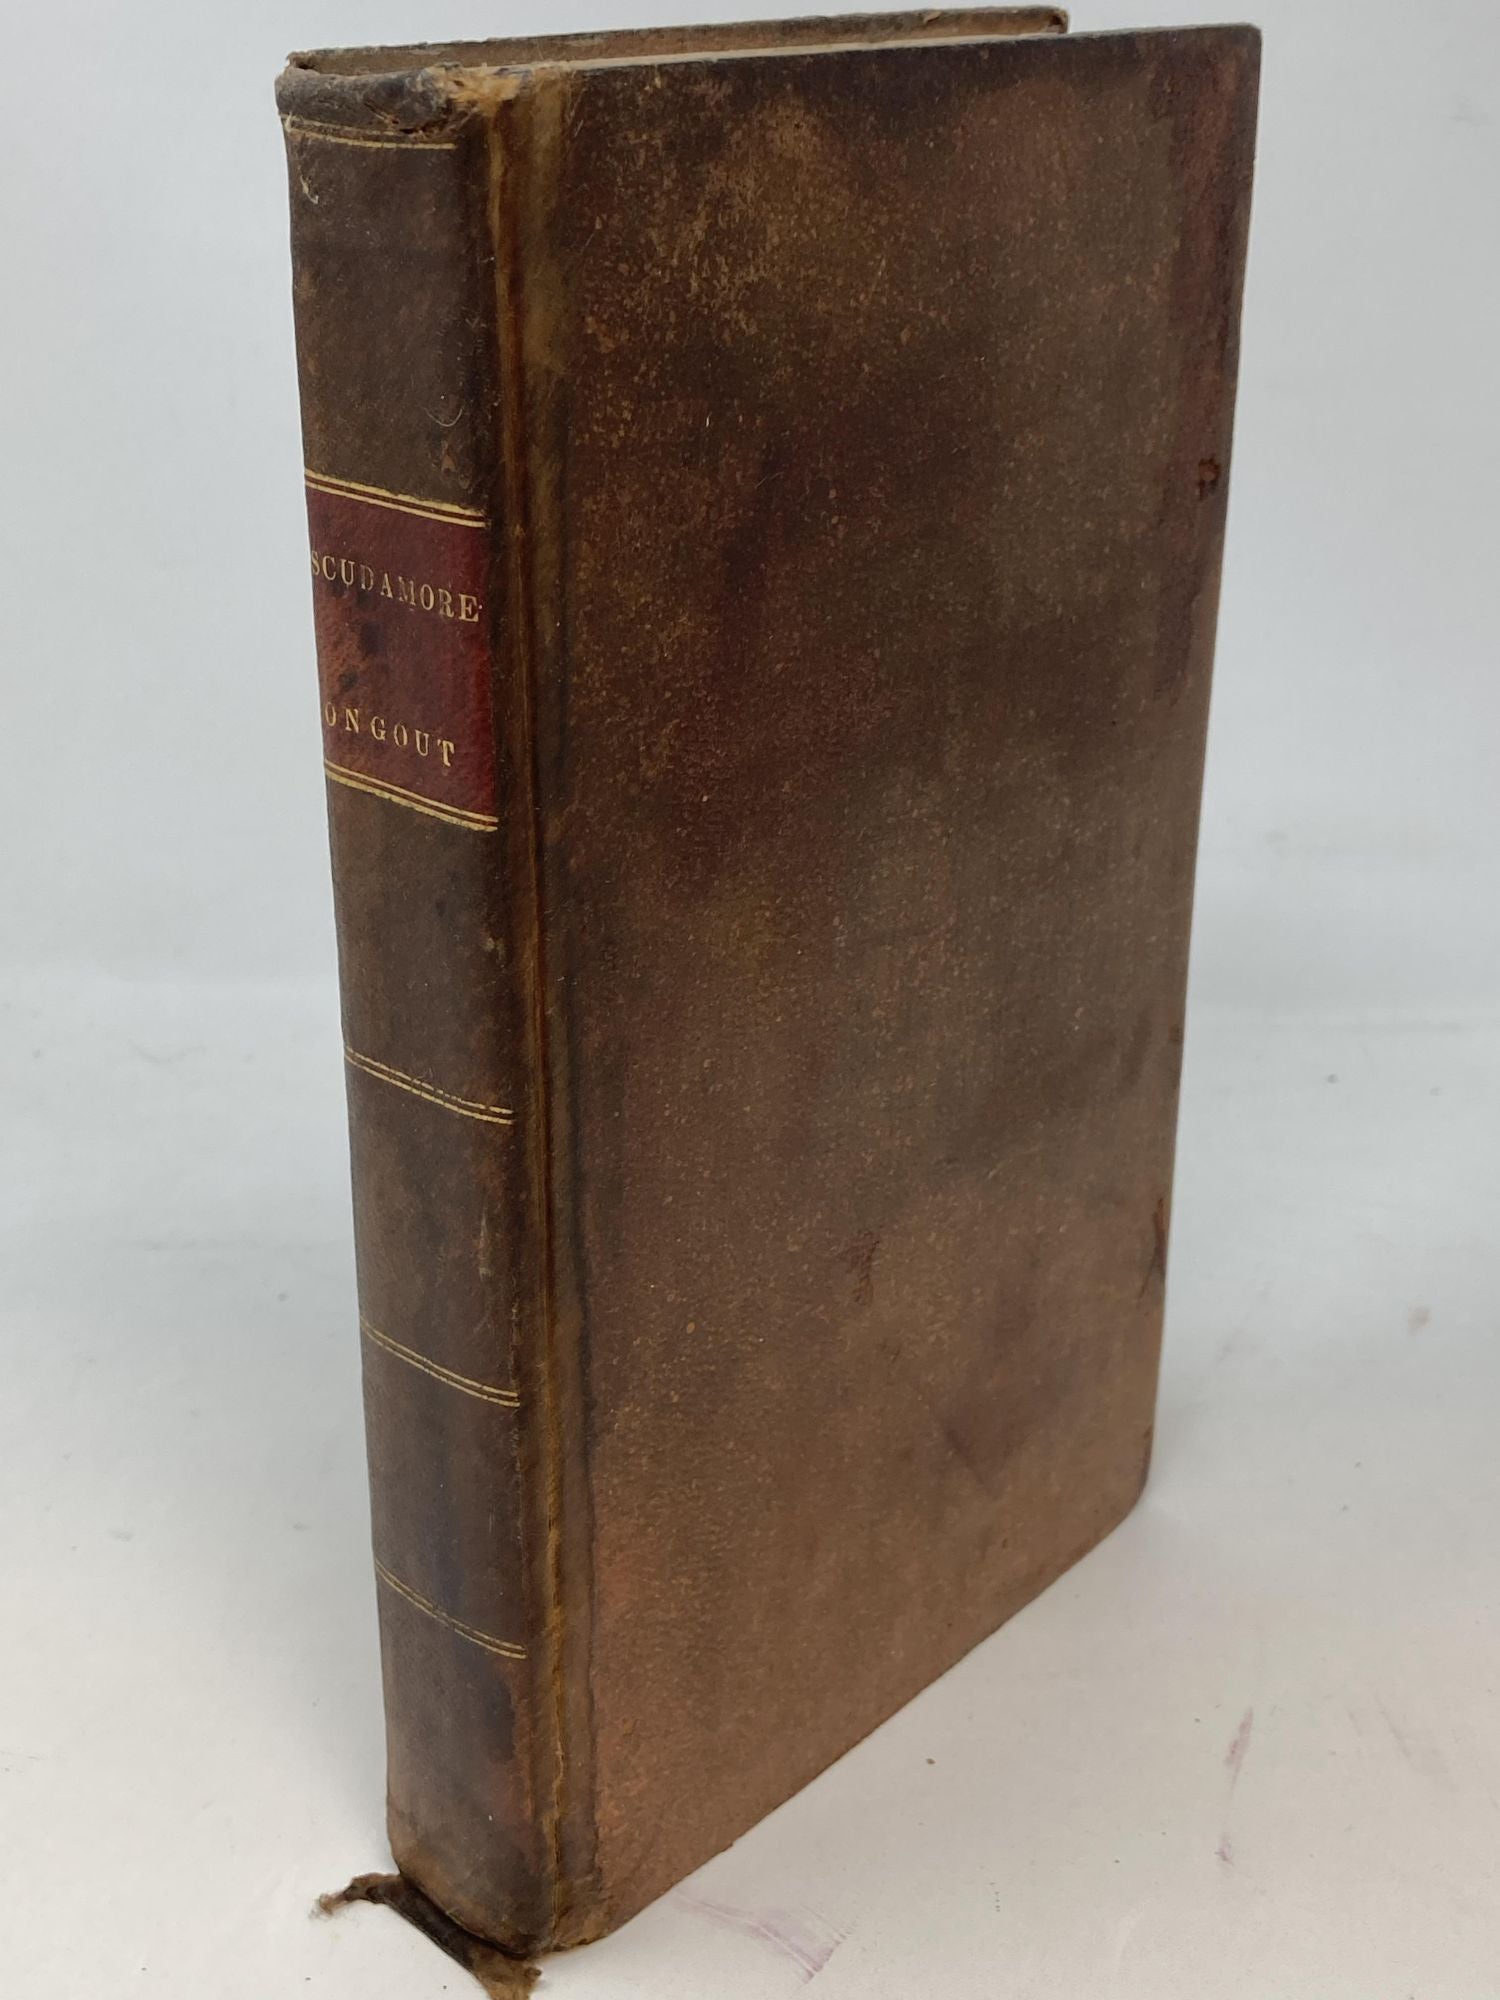 Scudamore, Charles - A Treatise on the Nature and Cure of Gout and Rheumatism Including General Considerations on Morbid States of the Digestive Organs, Some Remarks on Regimen; and Practical Observations on Gravel (Mason Locke Weems's Copy)